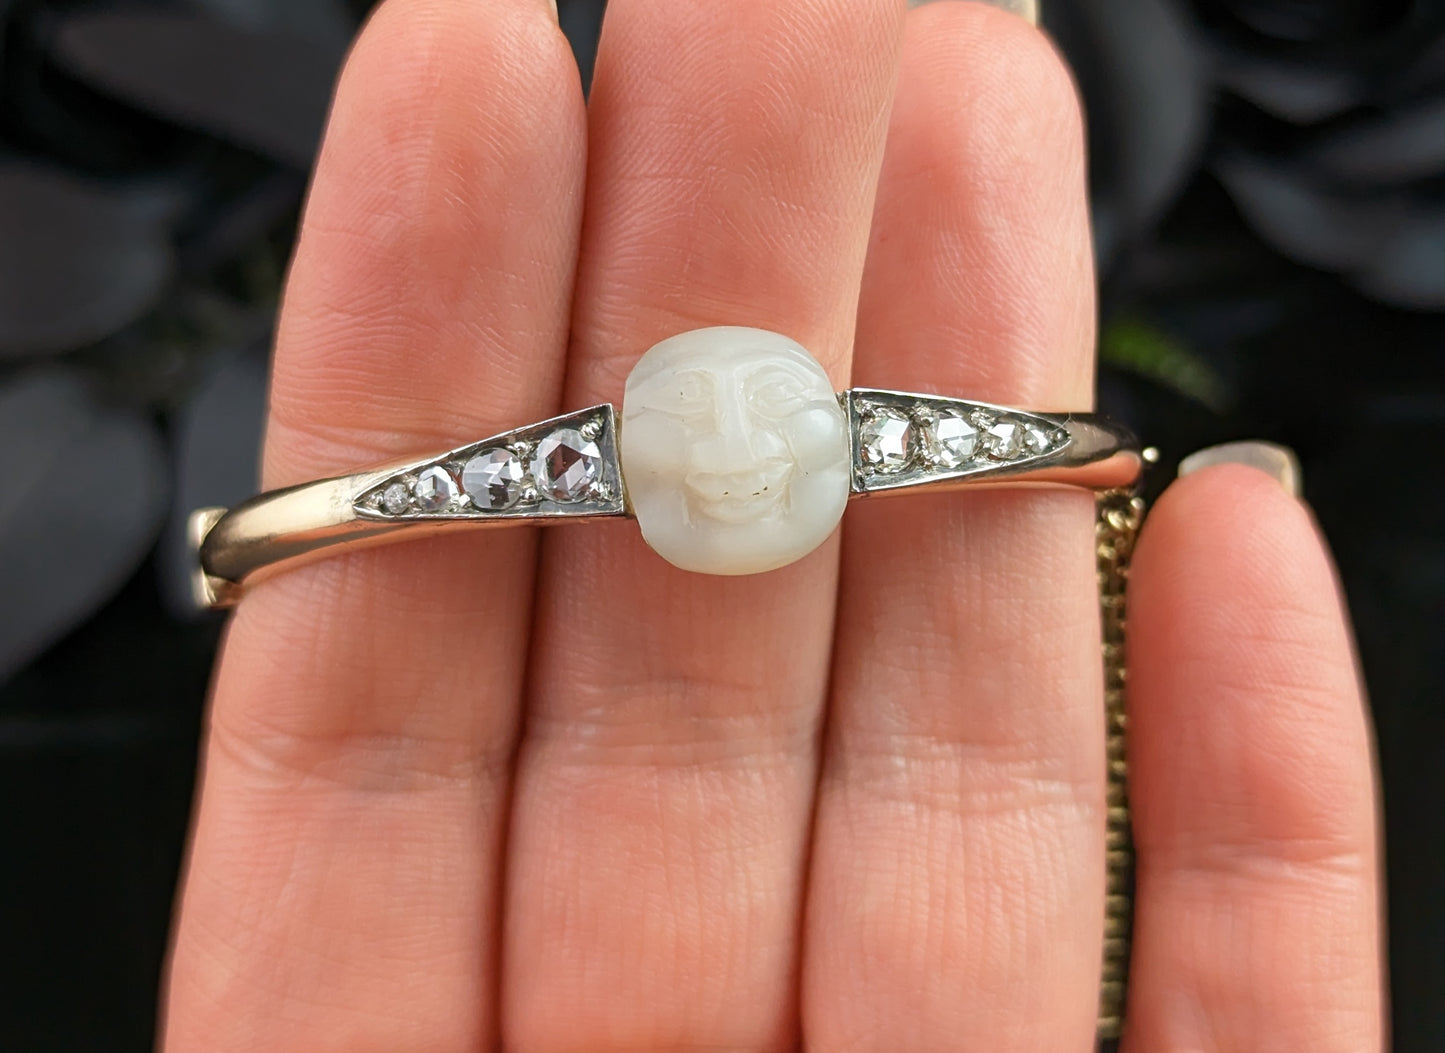 Antique Victorian Diamond Man in the Moon bangle, 18ct gold, Mother of Pearl